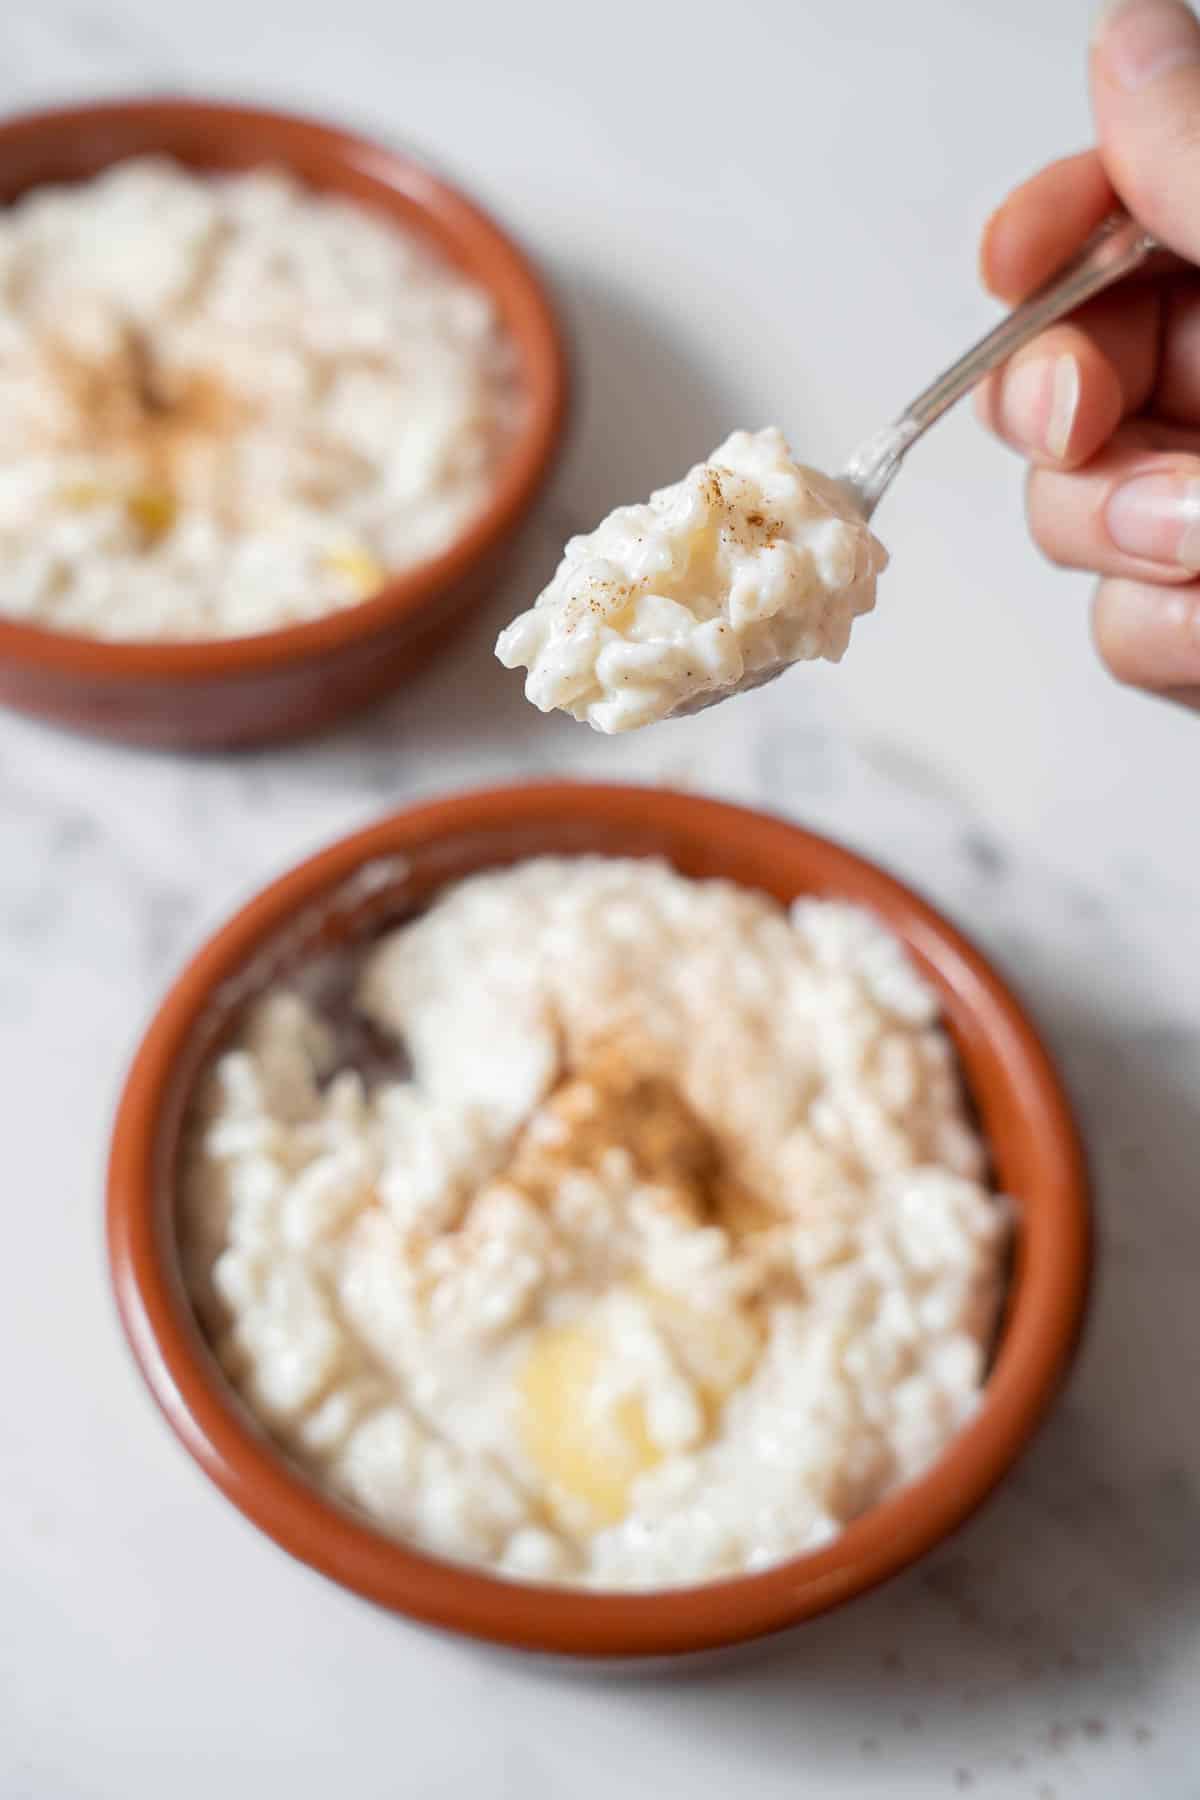 holding a forkful of arroz con leche.